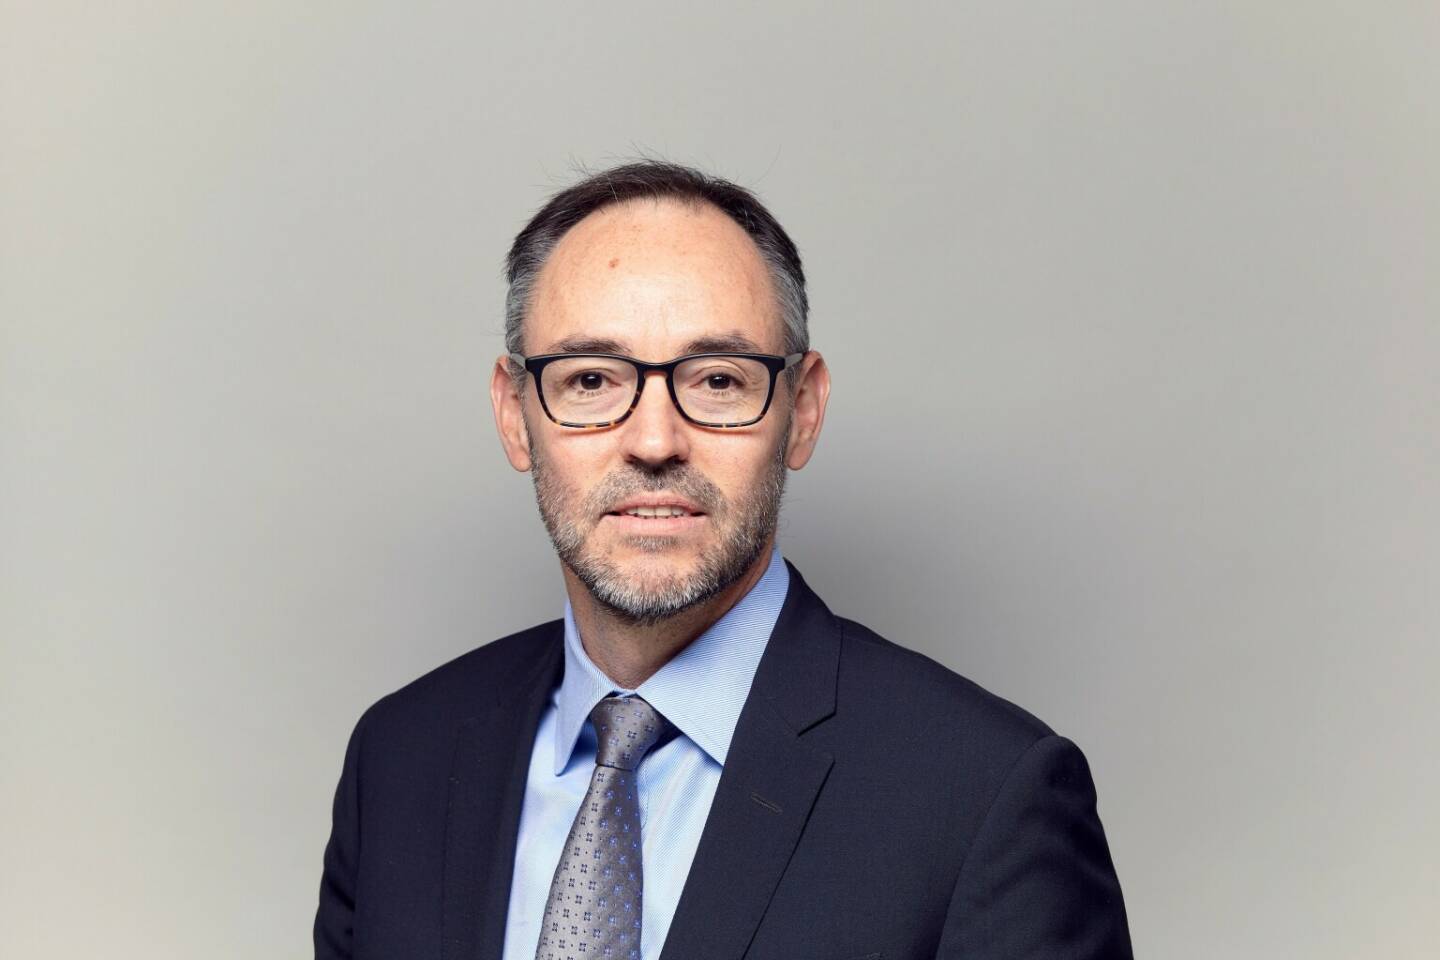 Guillermo Felices, Global Investment Strategist bei PGIM, (Quelle: PGIM Fixed Income)